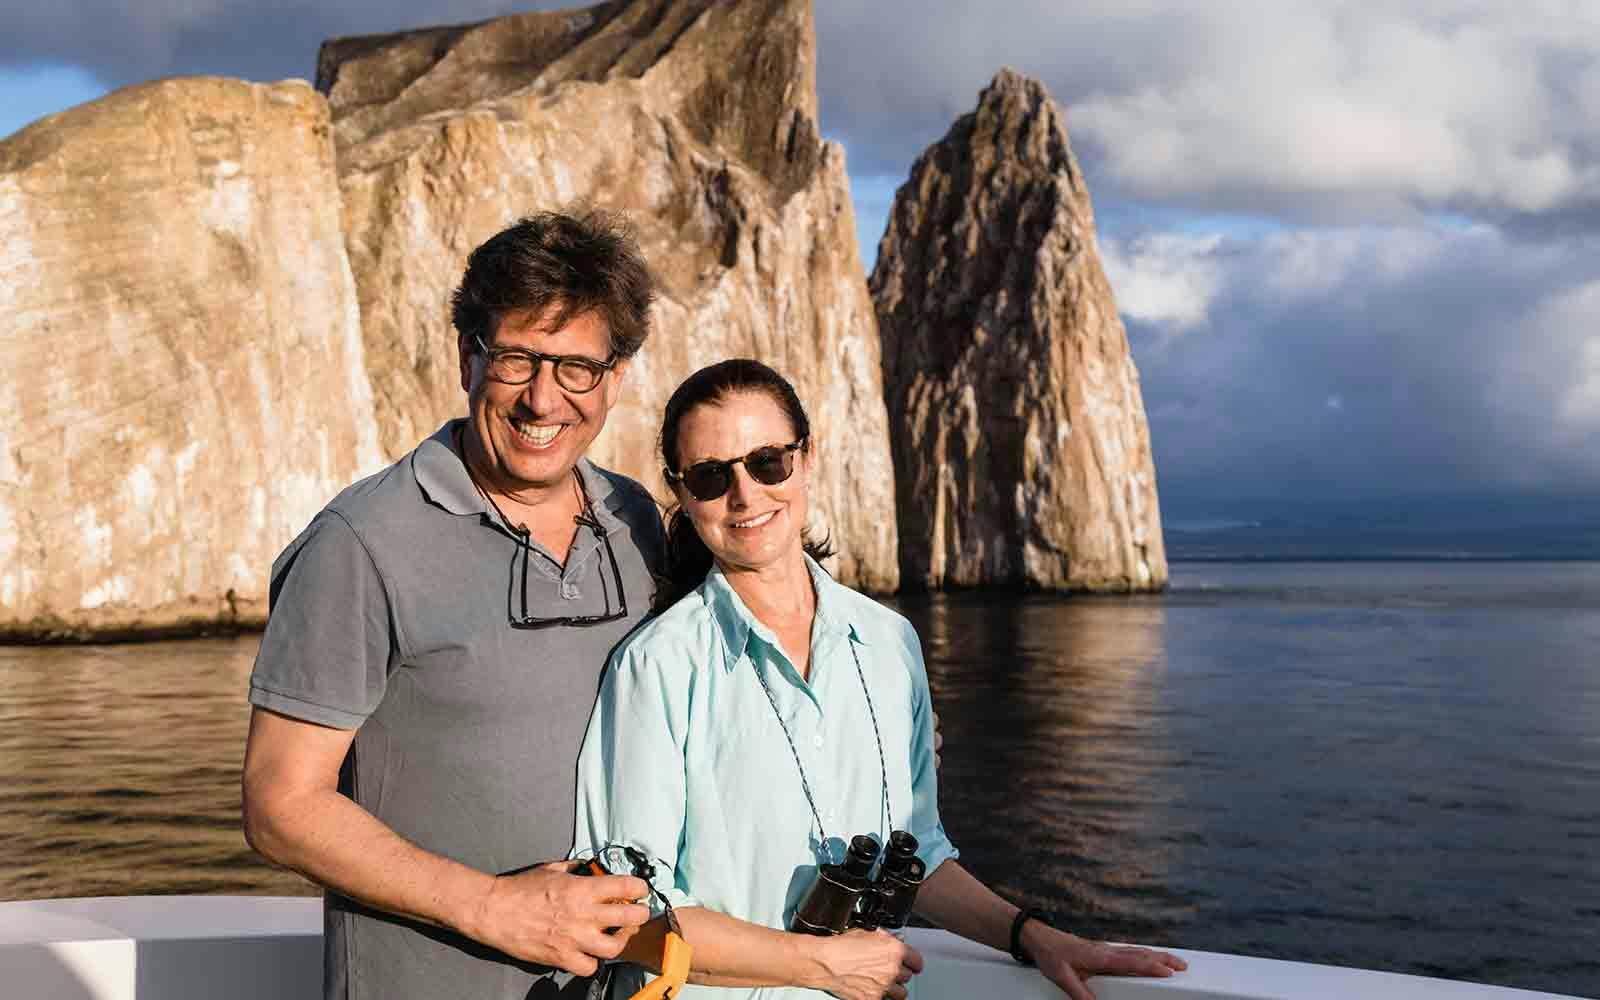 A man and woman posing for a photo on a boat in the galapagos islands.